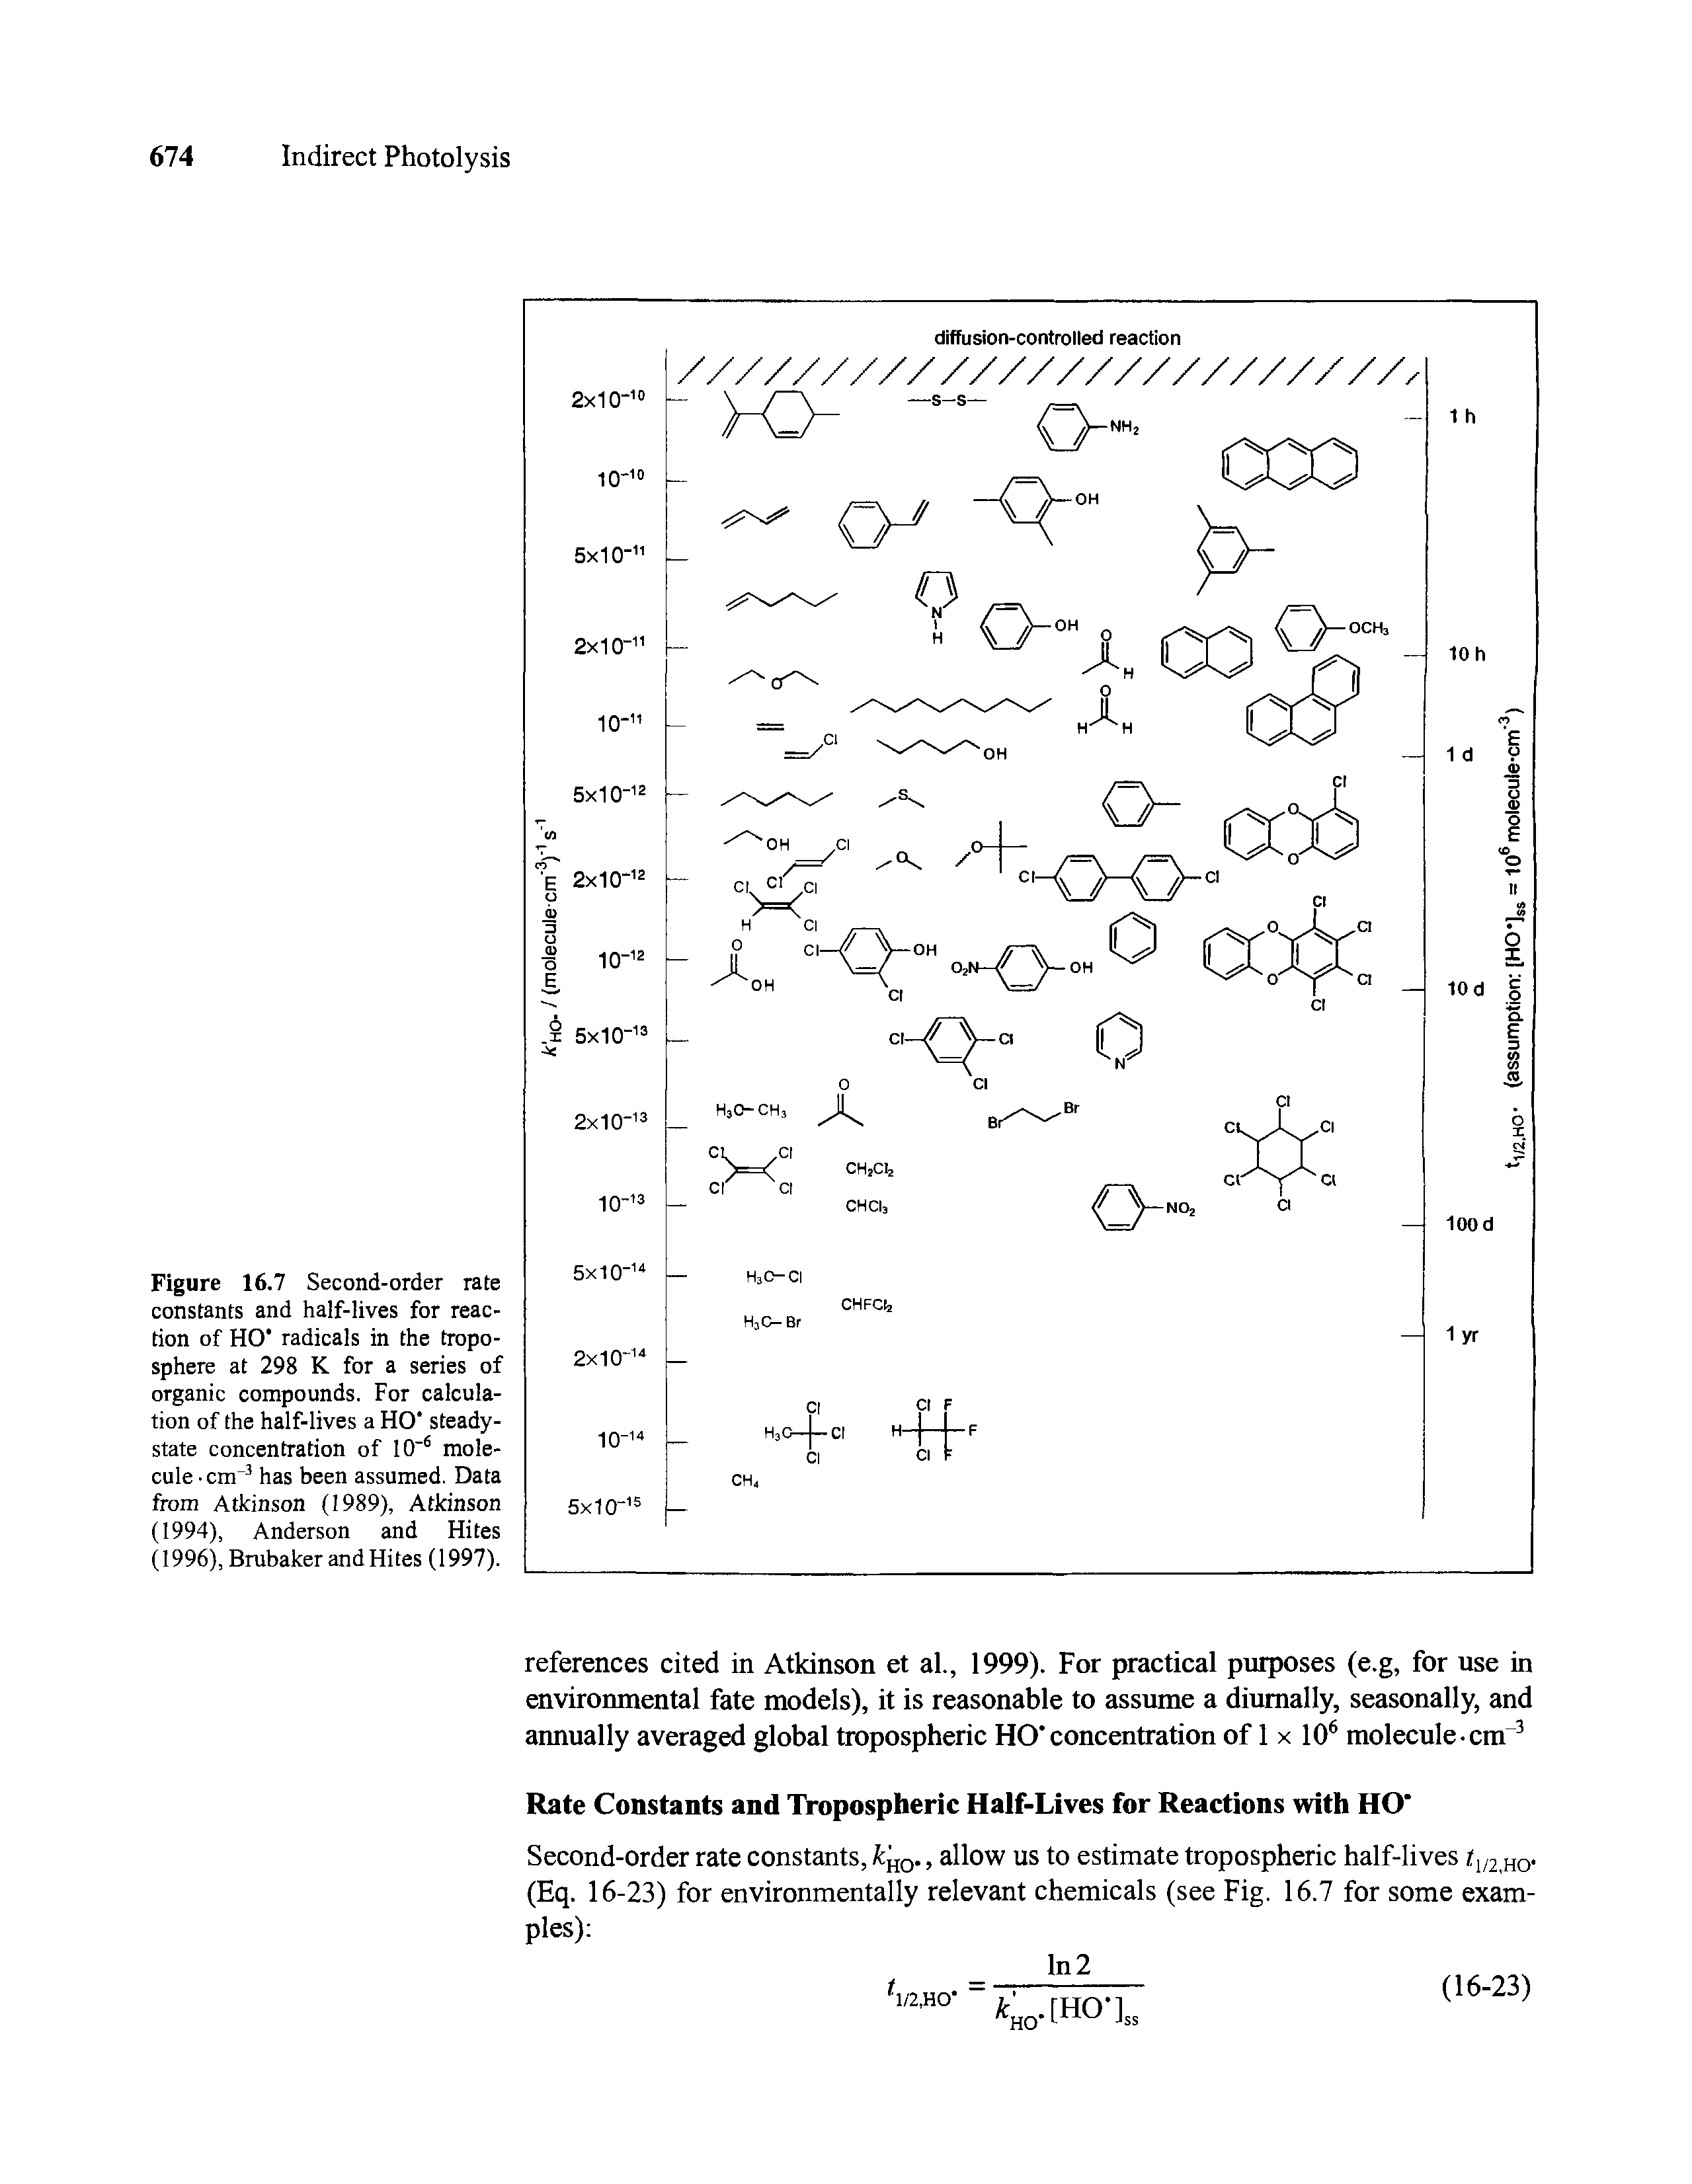 Figure 16.7 Second-order rate constants and half-lives for reaction of HO radicals in the troposphere at 298 K for a series of organic compounds. For calculation of the half-lives a HO" steady-state concentration of 10 6 molecule cm 3 has been assumed. Data from Atkinson (1989), Atkinson (1994), Anderson and Hites (1996), Brubaker and Hites (1997).